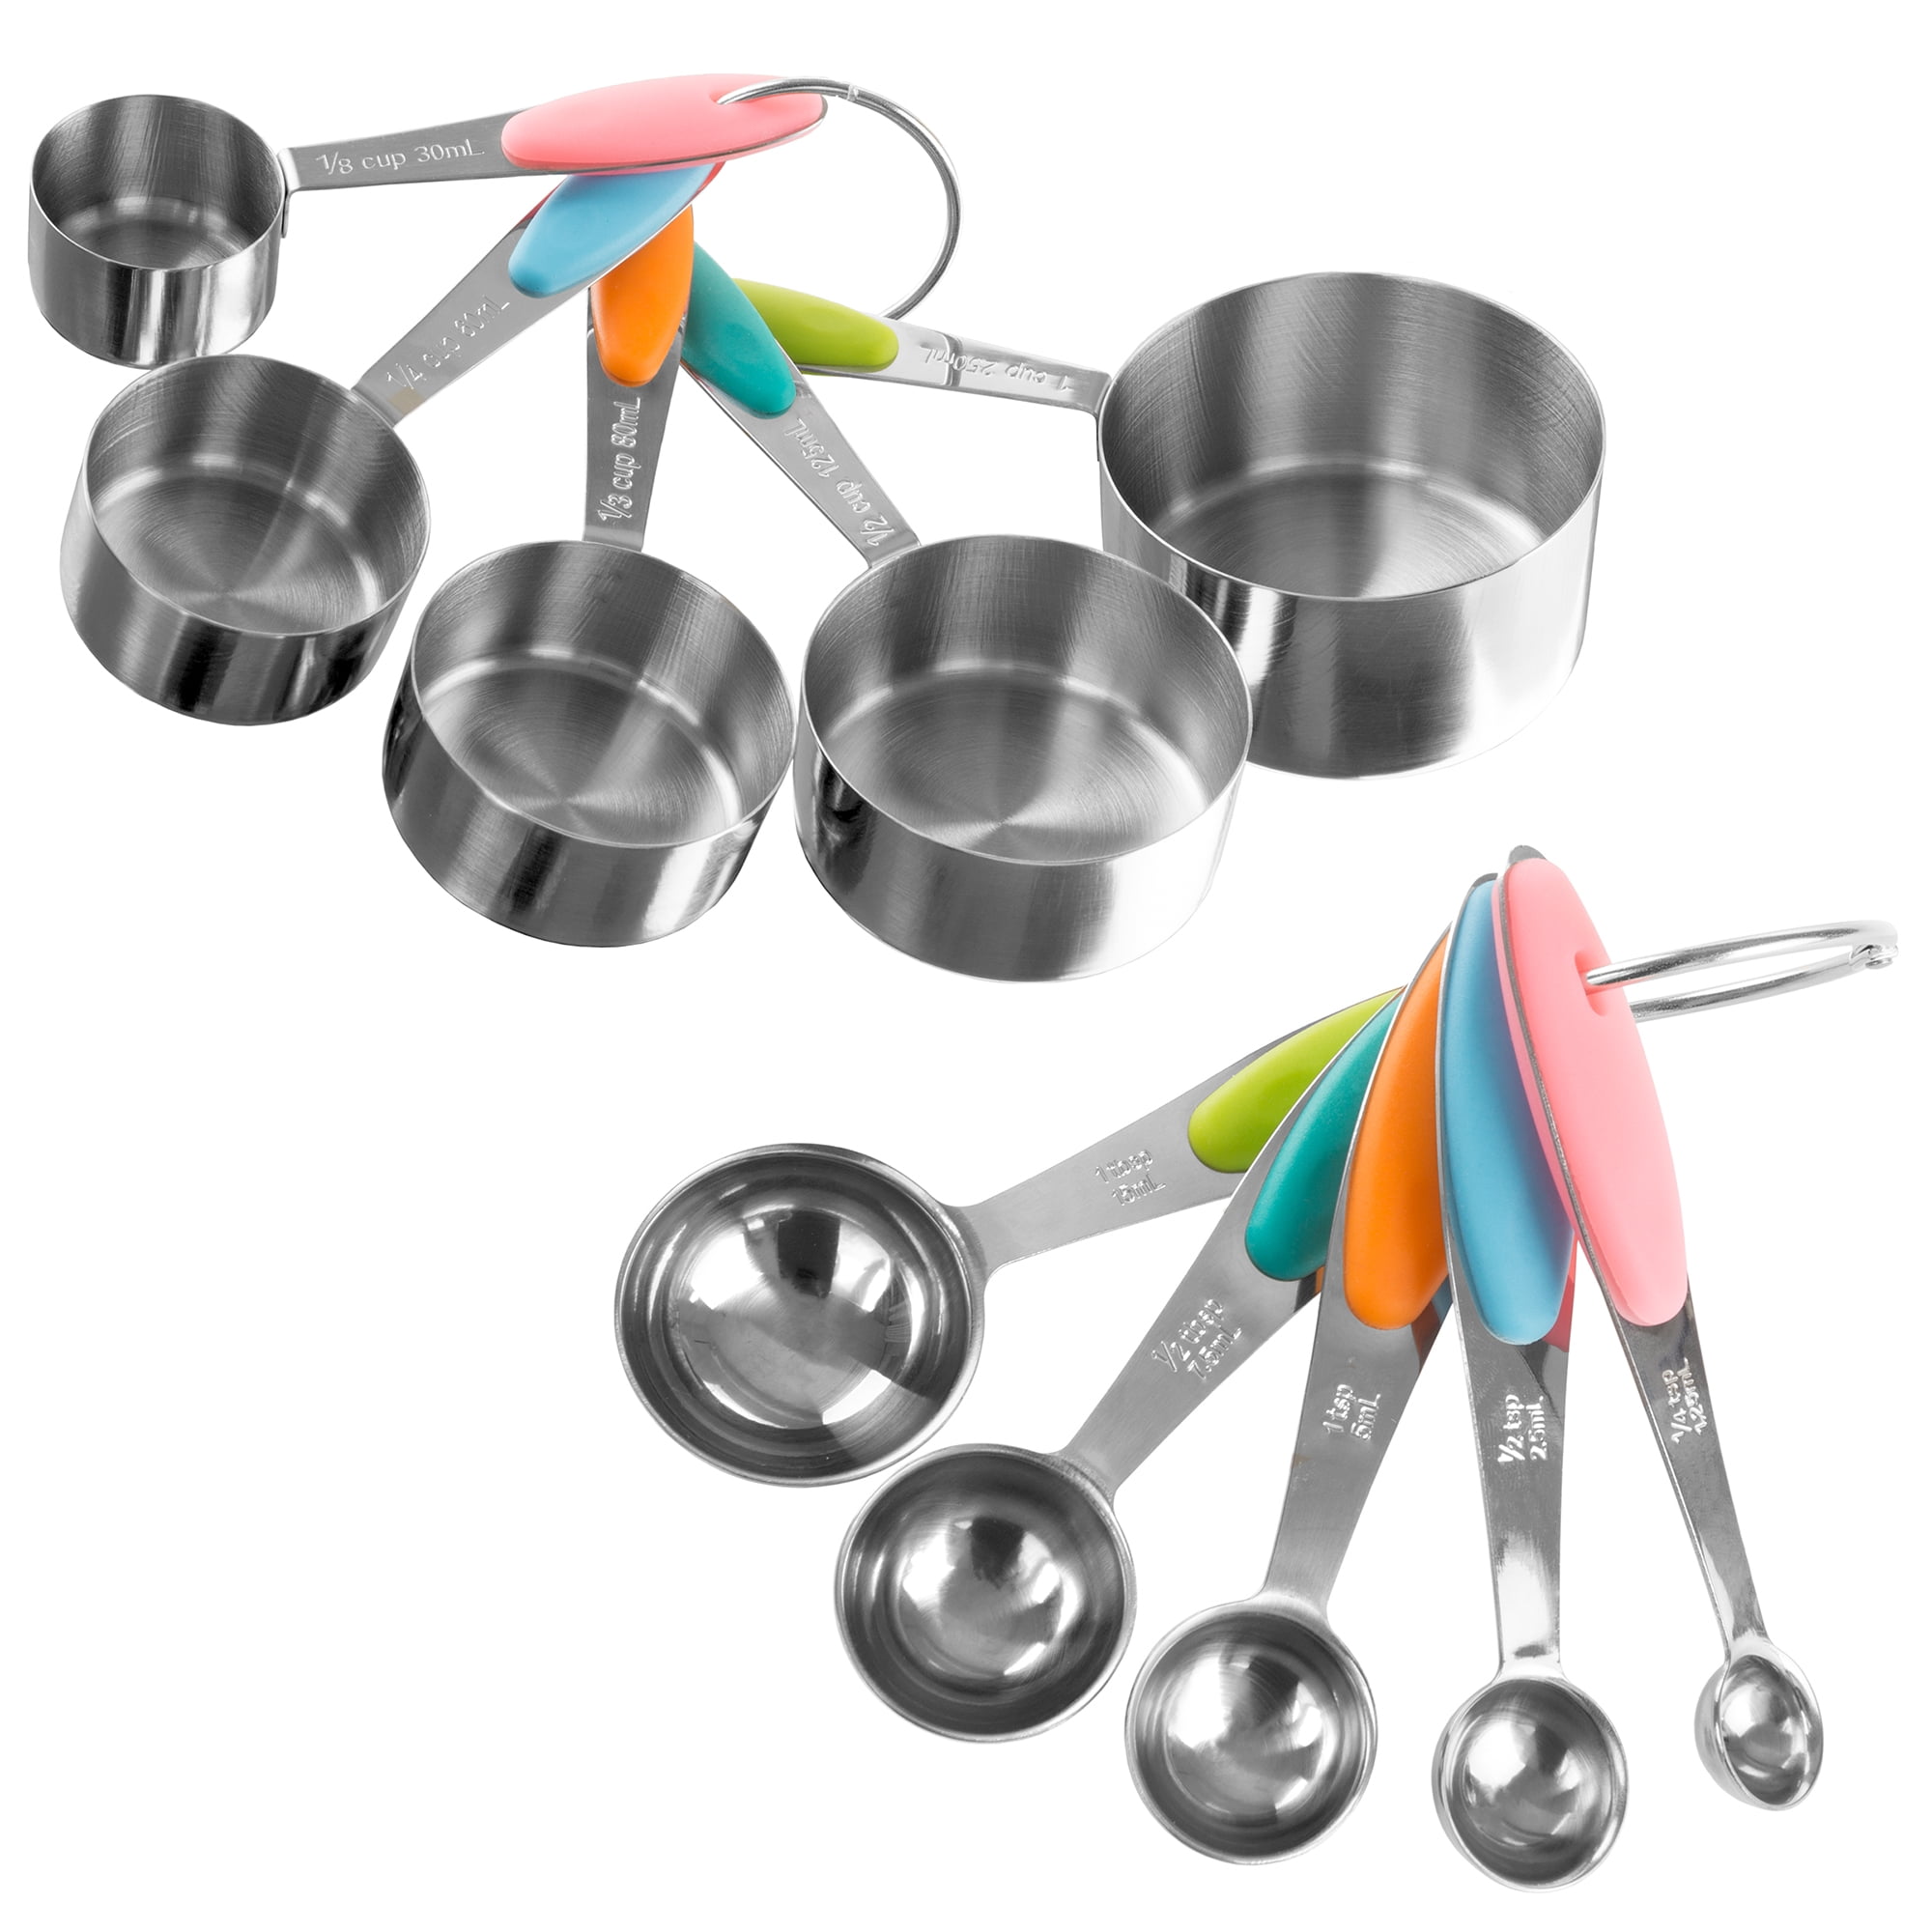 Measure Cups Spoons Set, Stackable Scale Design Stainless Steel Measuring  Spoons Cups Set Safe Multifunctional Space Saving for Kitchen 